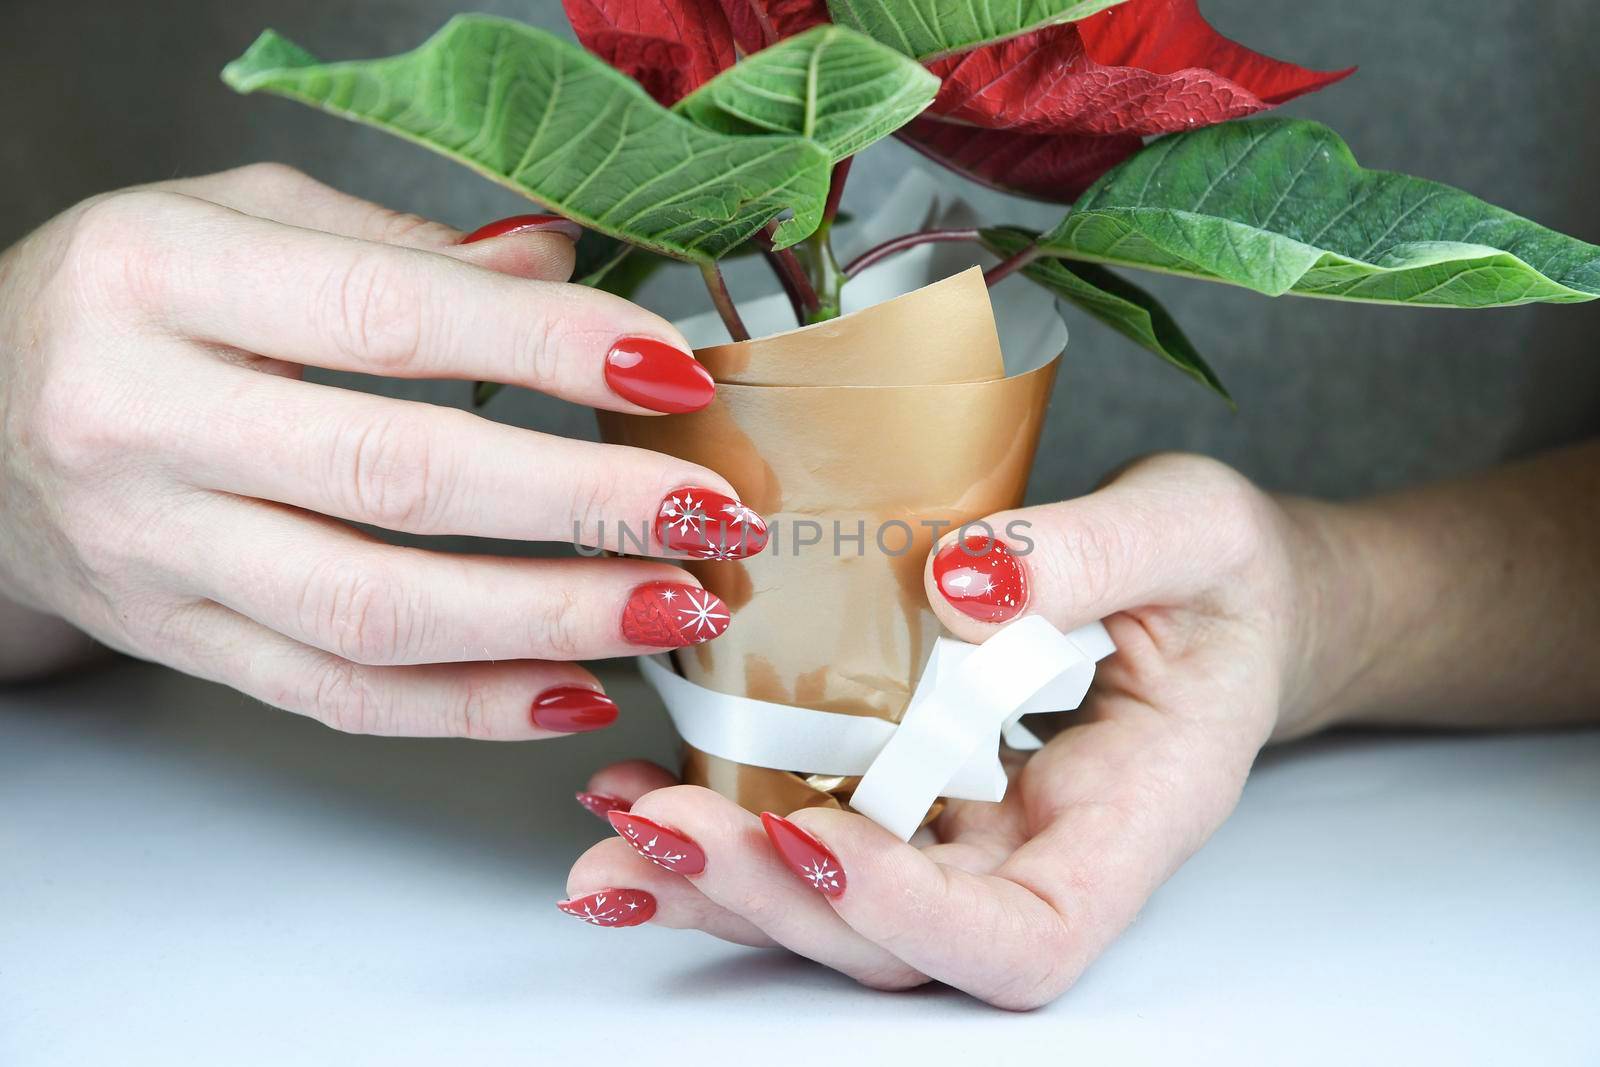 female hands with beautiful red holiday manicure design holding mini poinsettia flower, christmas decor for beauty, High quality photo